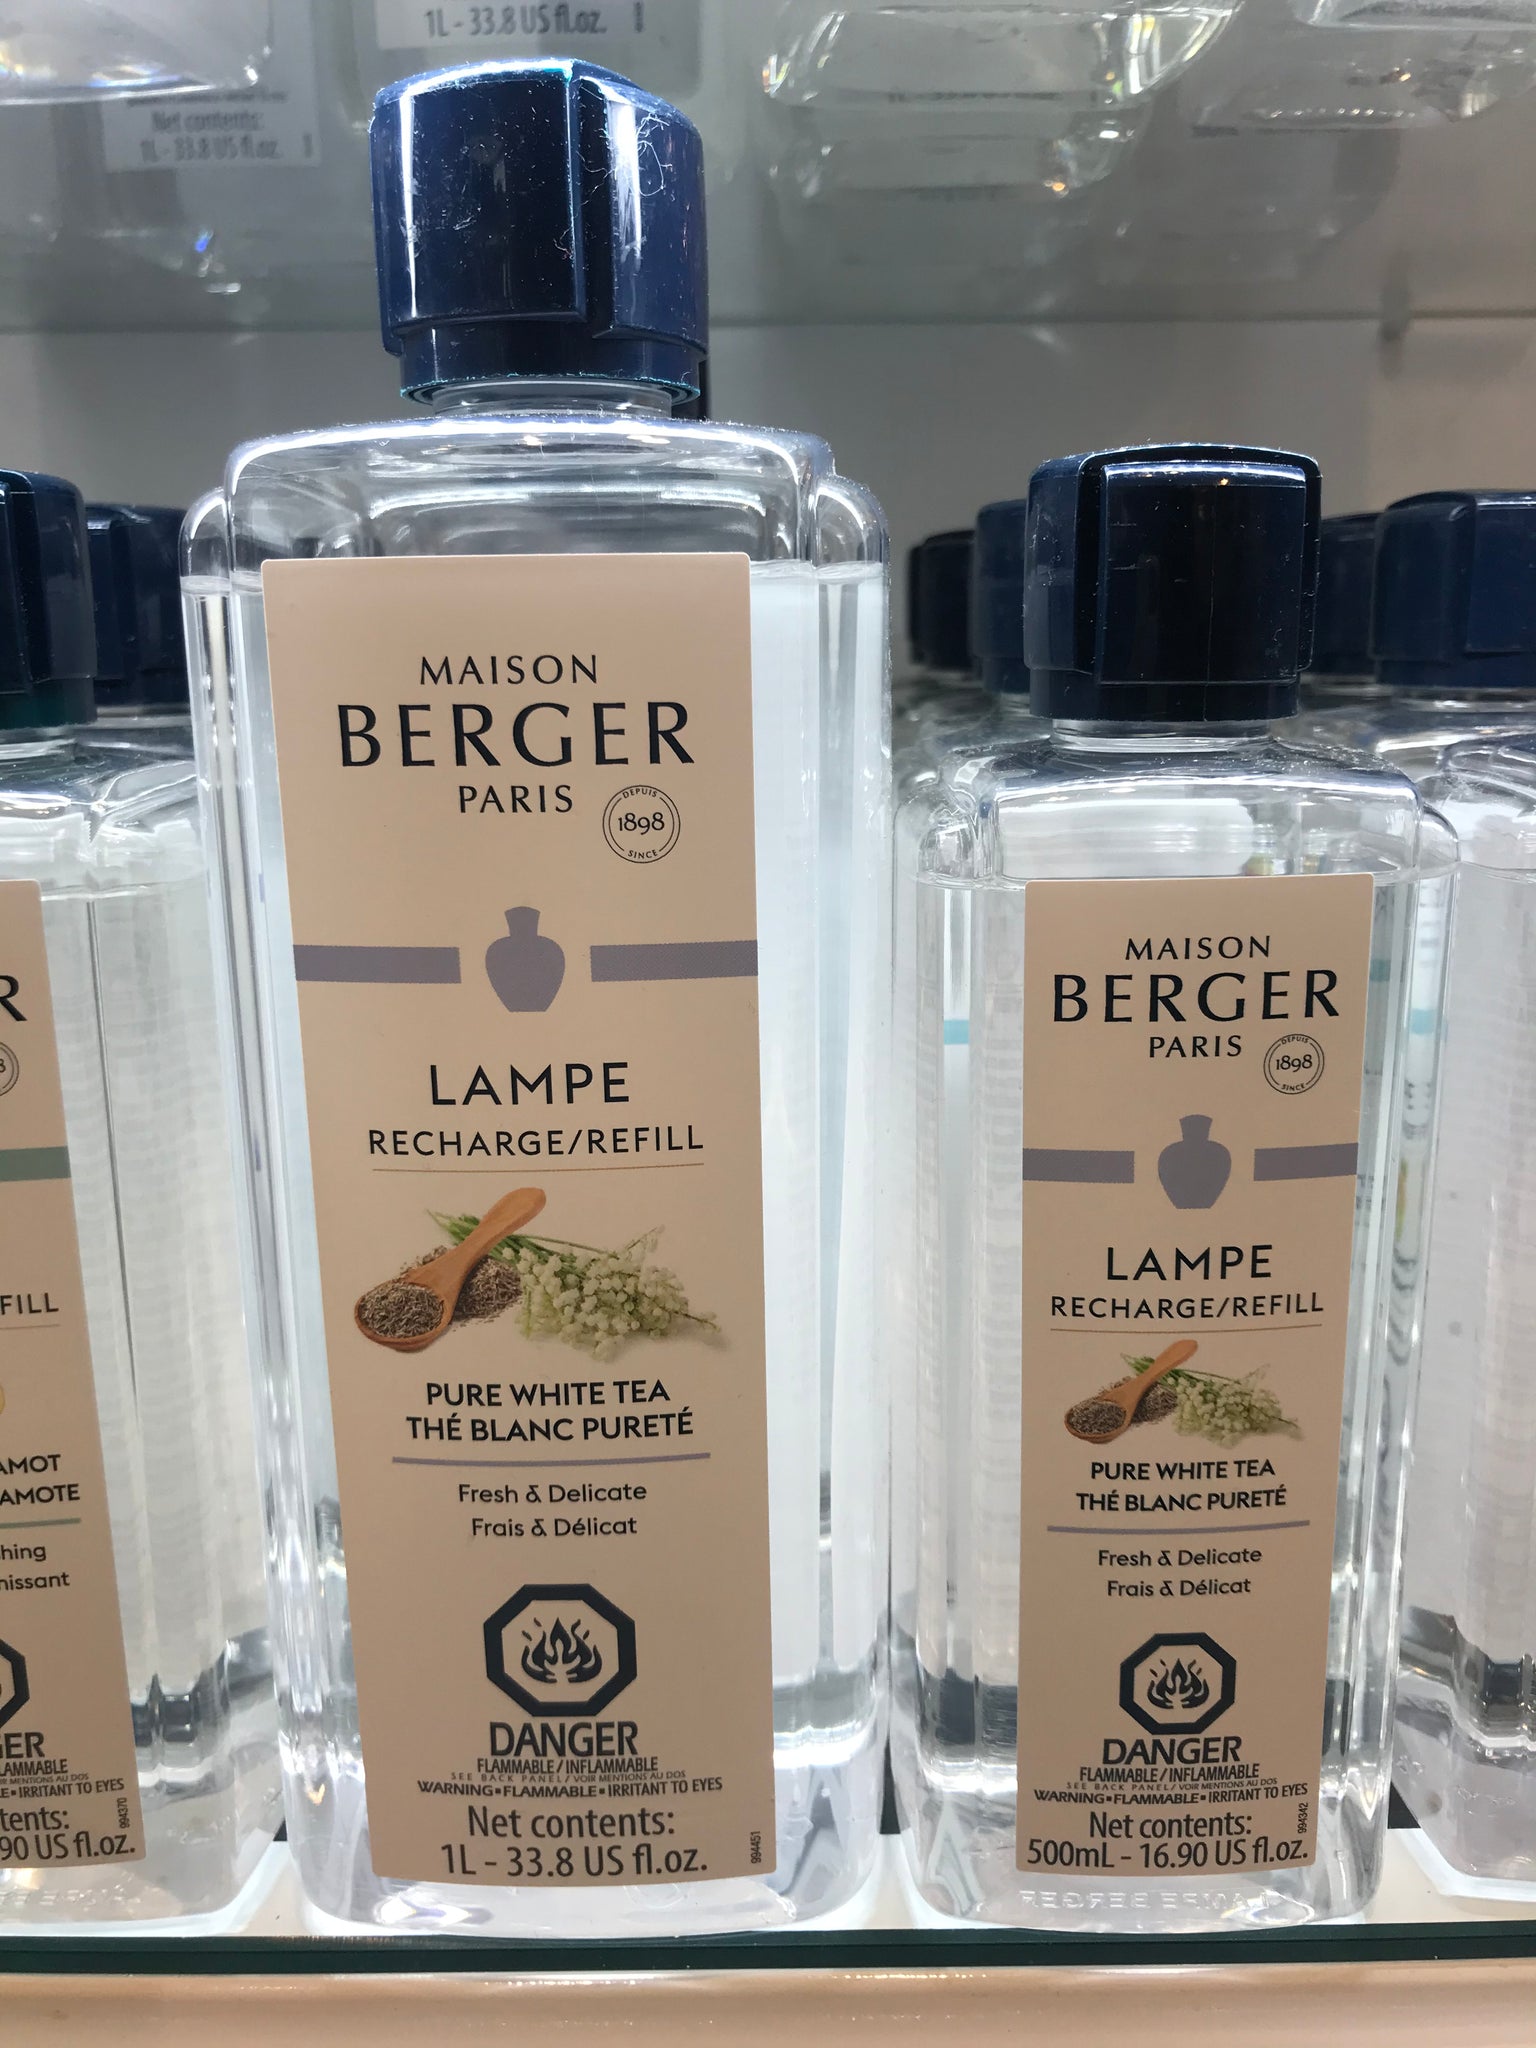 Maison Berger Home Sweet Home Lampe Fragrance 500ml